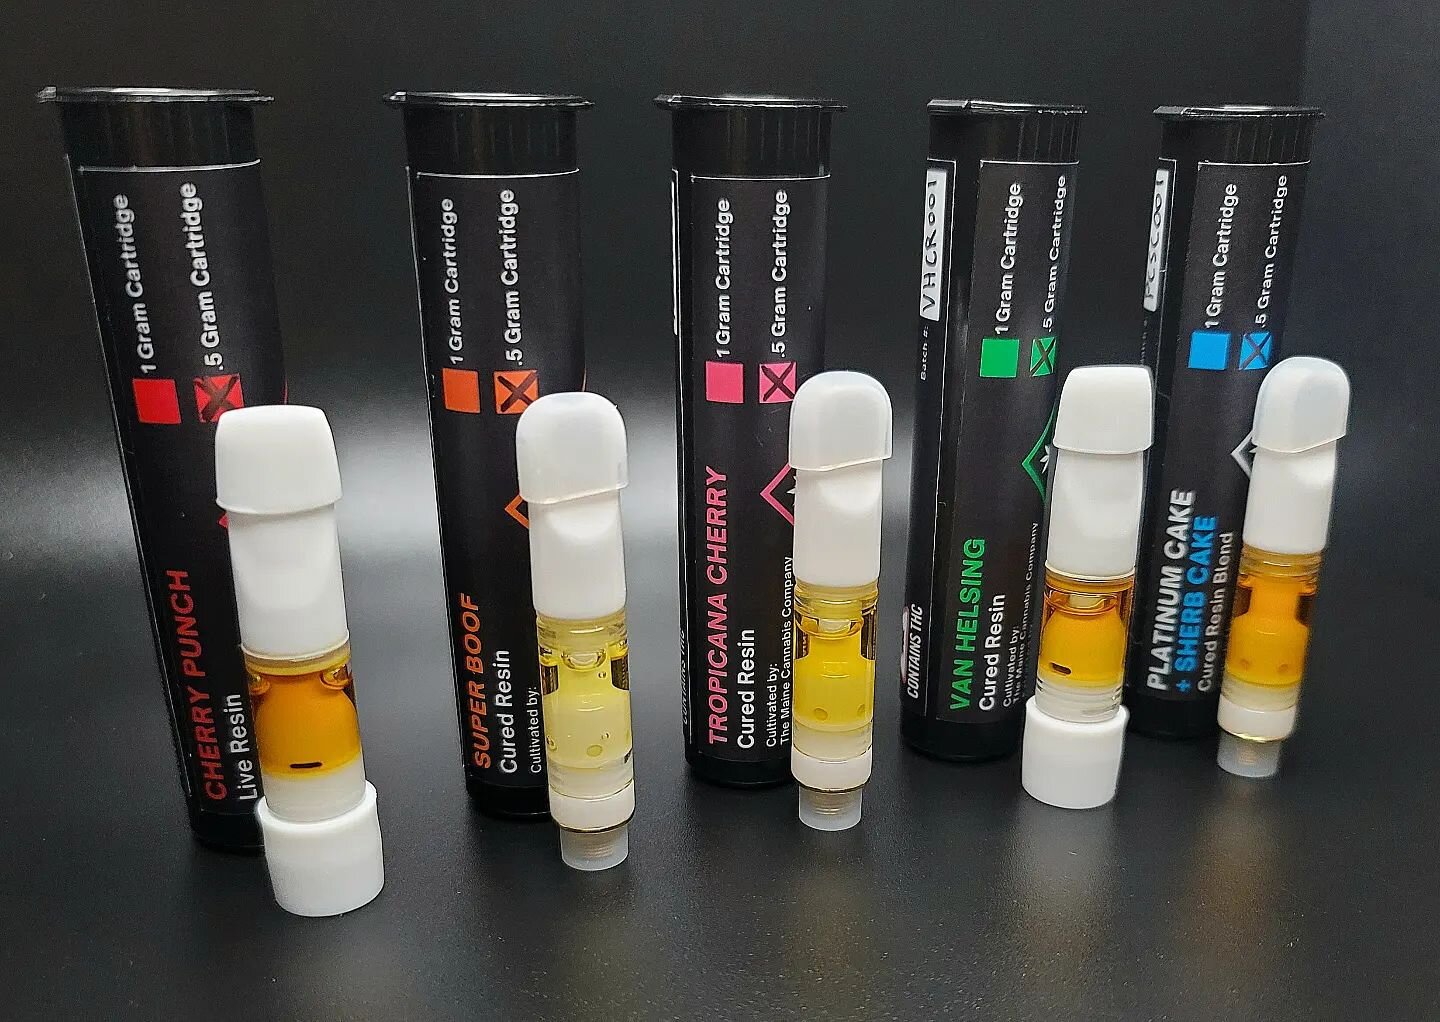 Flight of Cartridges! ✈️💨
.
This is our first flight of cartridges!
We understand it can be hard to choose sometimes, this Flight allows you to try a variety of the flavors, packed into fully ceramic cartridges! 
.
This flight includes 5 different s